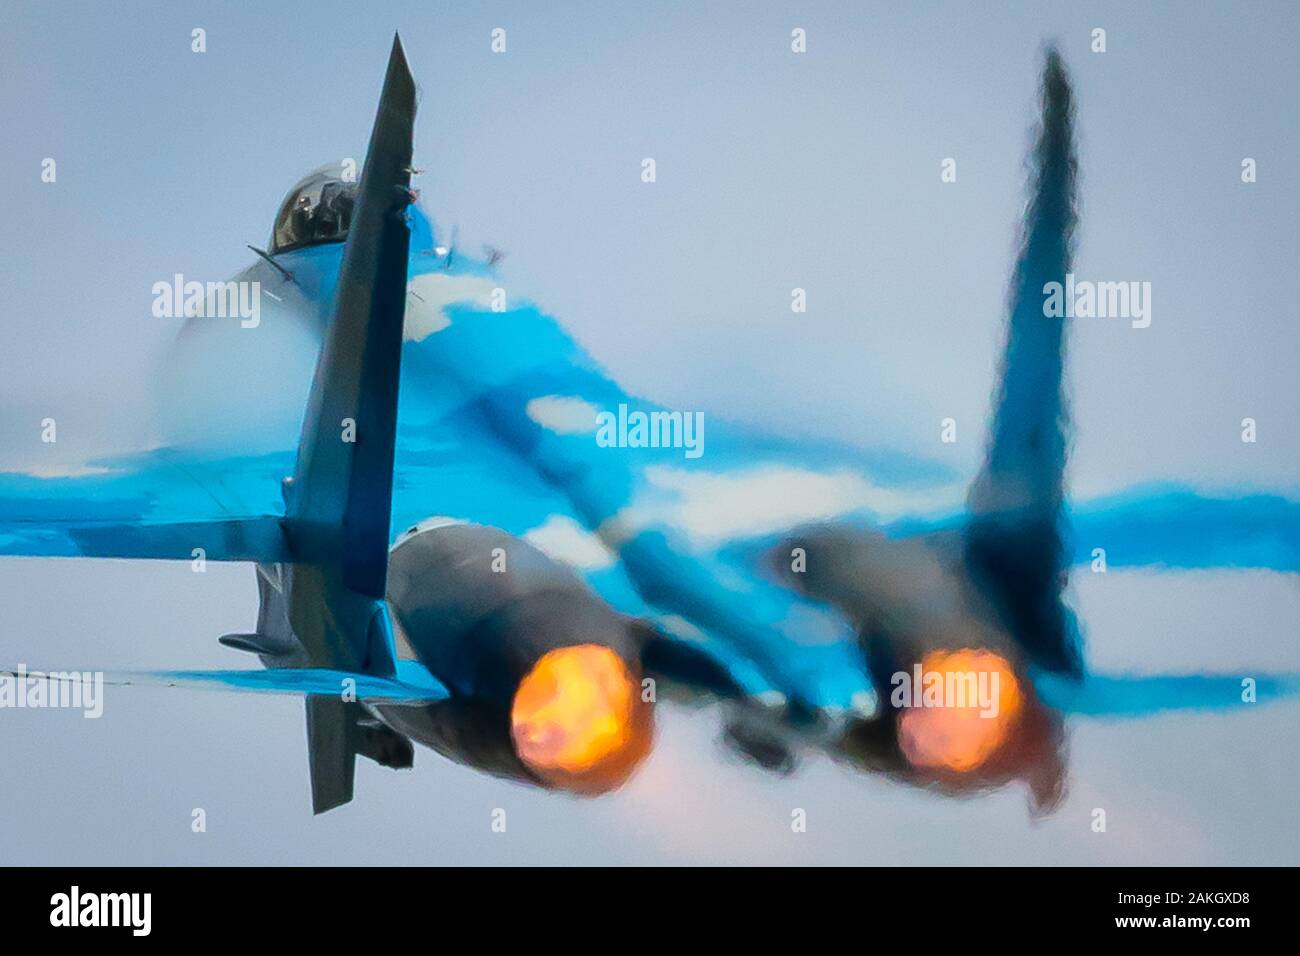 Fairford, Gloucestershire, UK - July 20th, 2019: Ex-Russian Soviet Cold War Ukrainian Sukhoi SU-27 Flanker Displays at the Fairford International Air Stock Photo